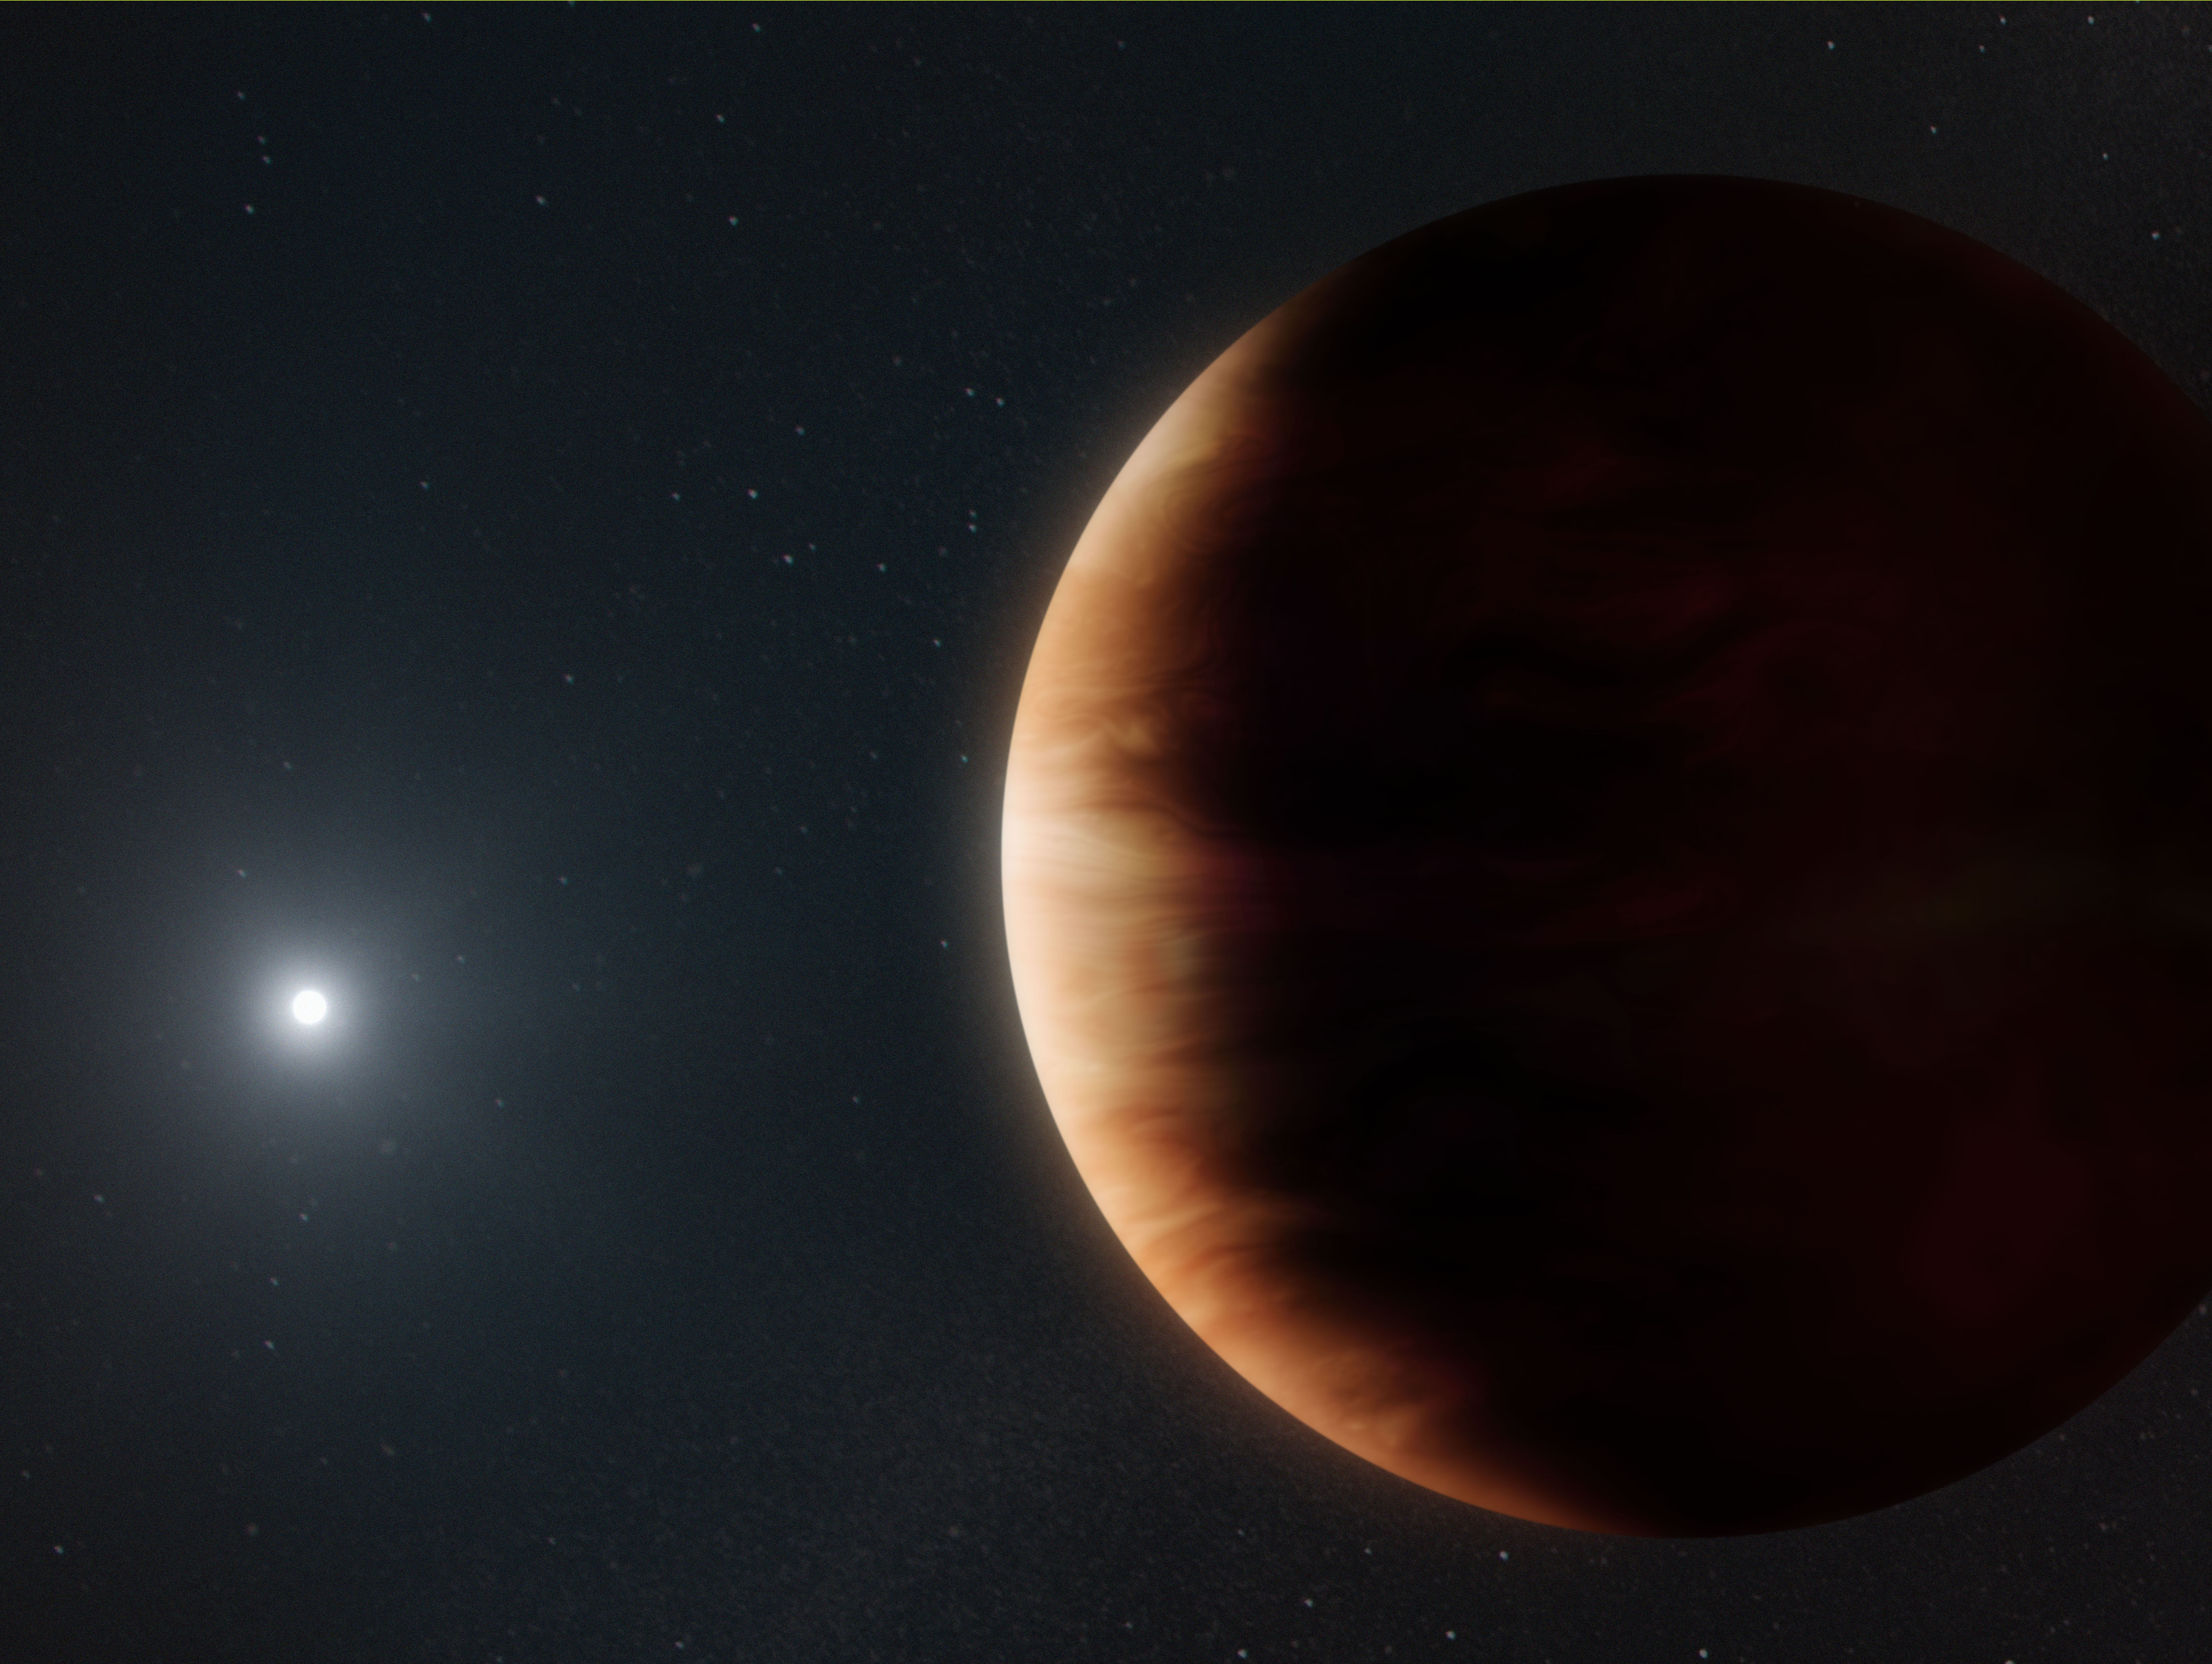 Planets orbiting from a sufficient distance can continue to exist after their star dies. New evidence gathered from a solar system like our own (depicted in this artist’s rendering) suggests that Jupiter and Saturn might survive the Sun’s red giant phase—when it burns the last of its nuclear fuel and collapses some 5 billion years from now. Credit:W. M. Keck Observatory/Adam MakarenkoFile